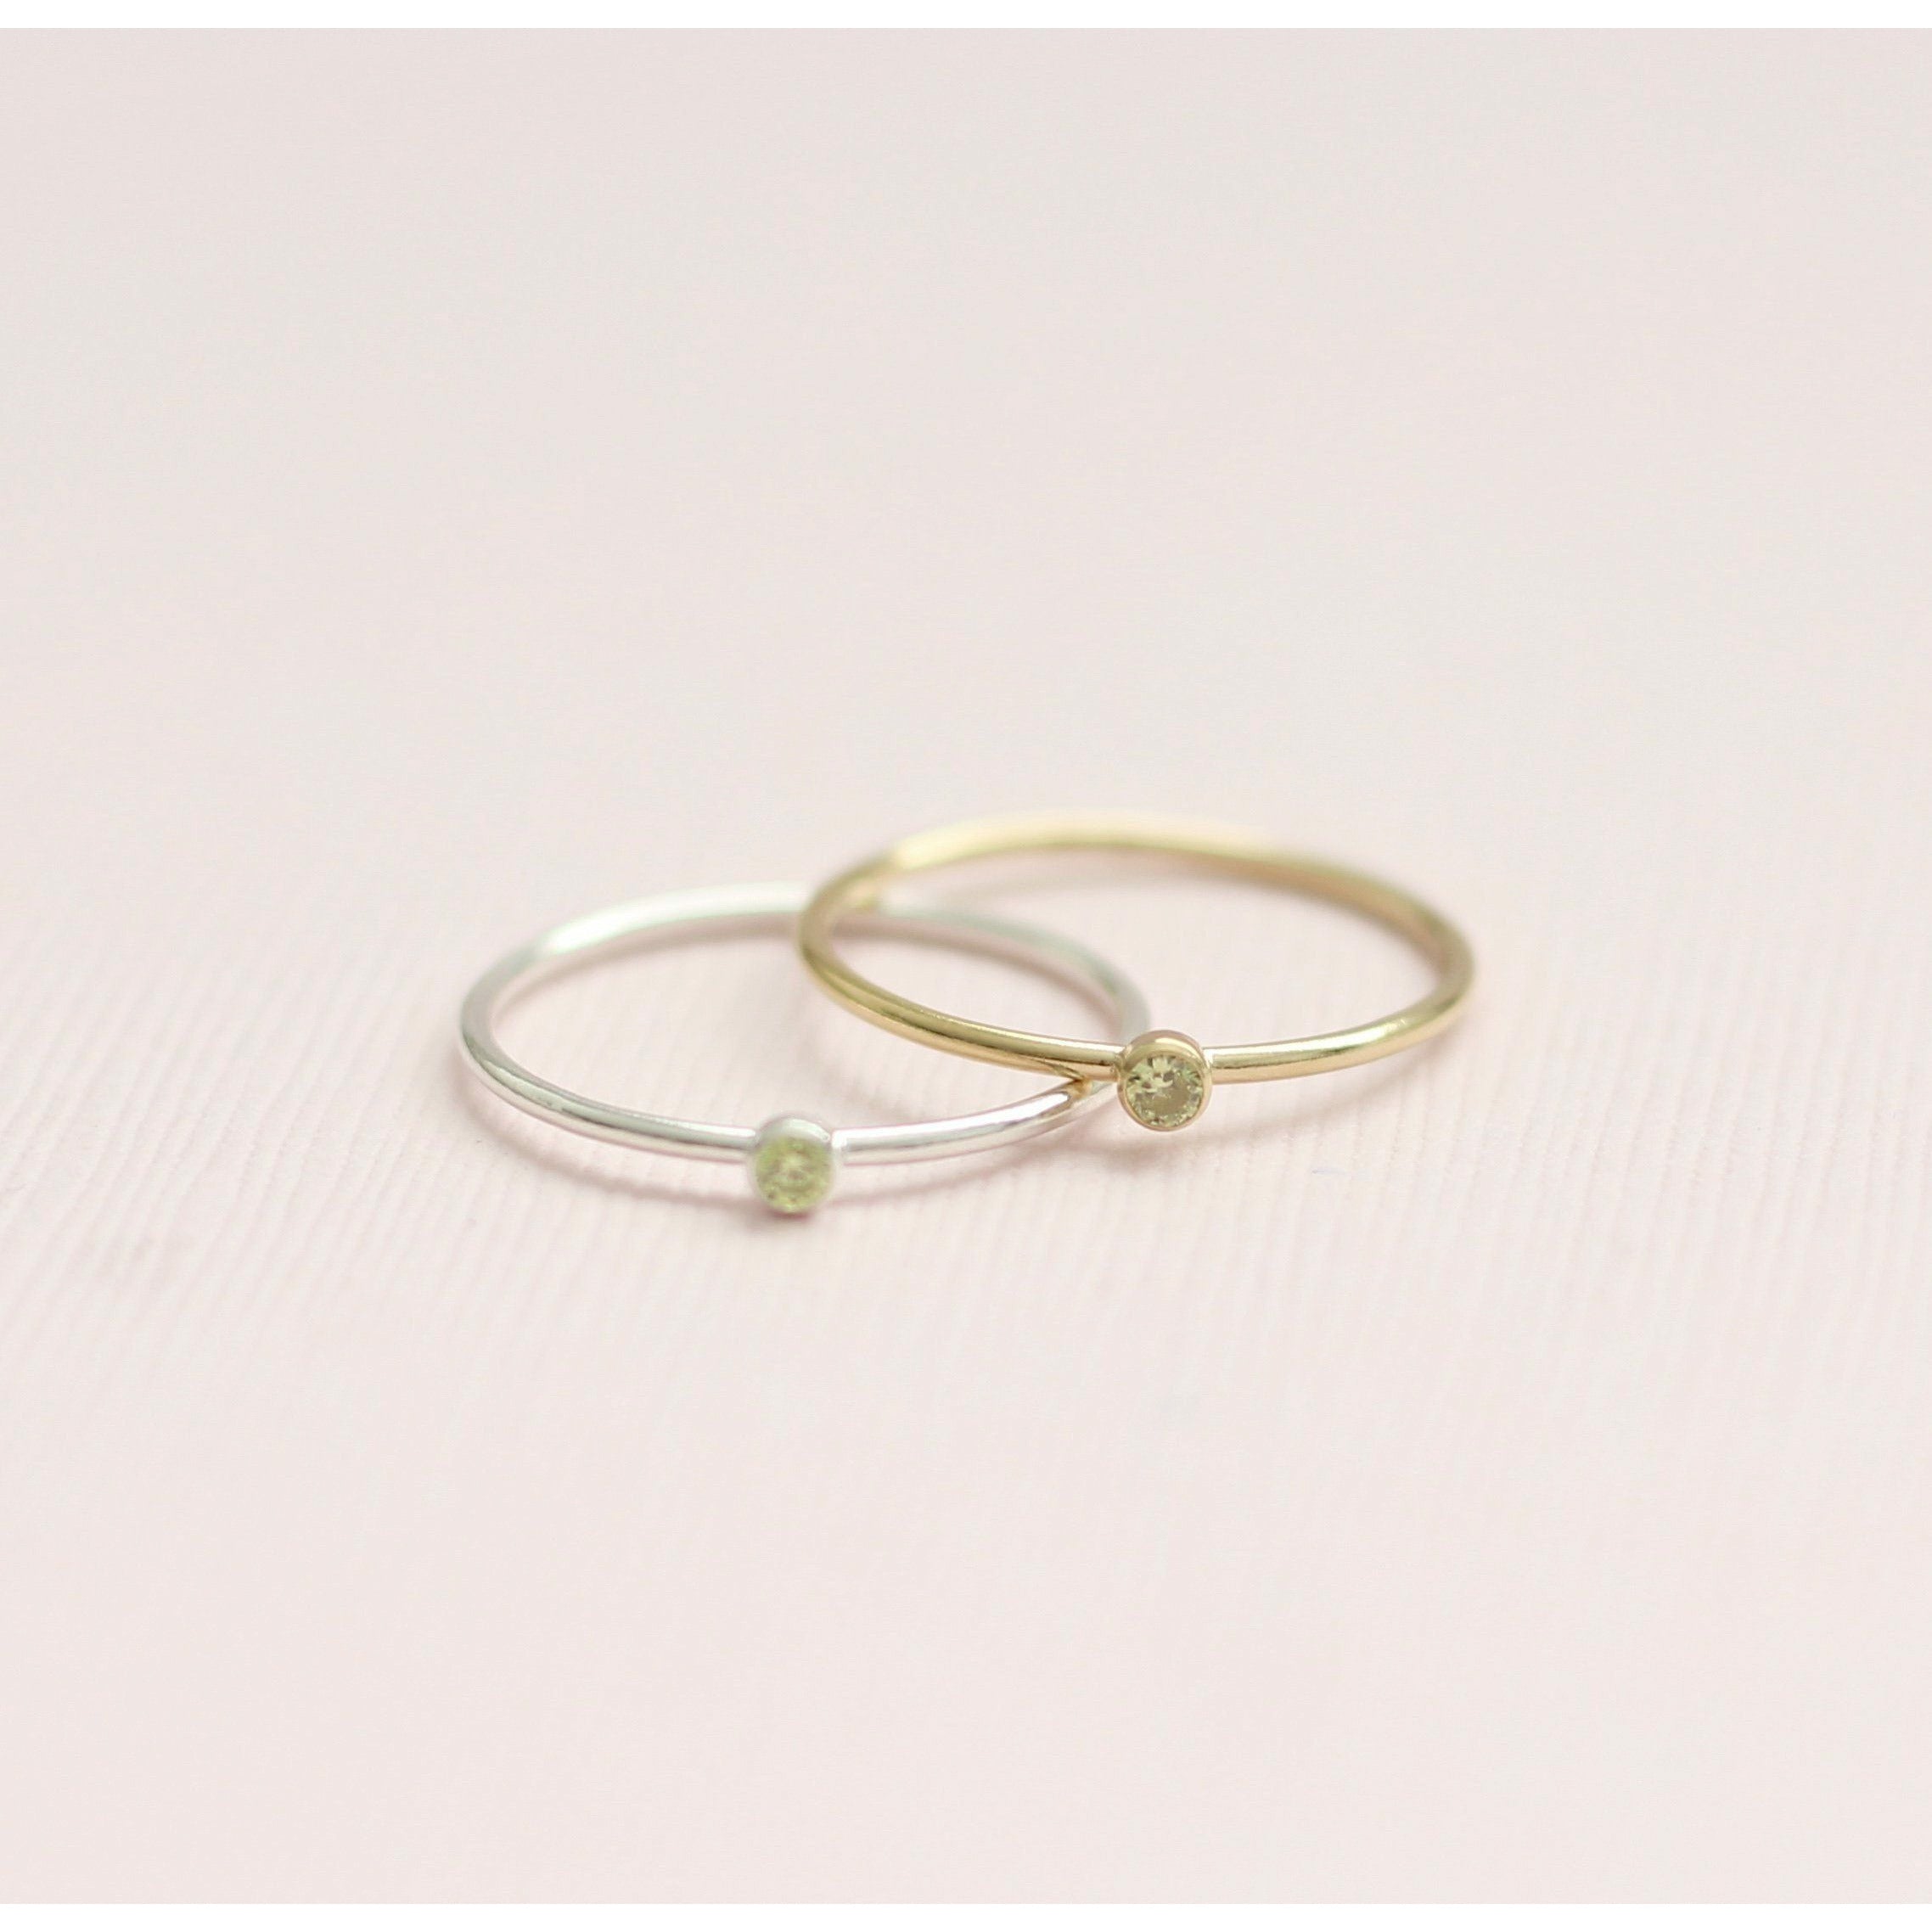 August birthstone rings made with sterling silver and gold filled, August birthstone peridot made in Canada